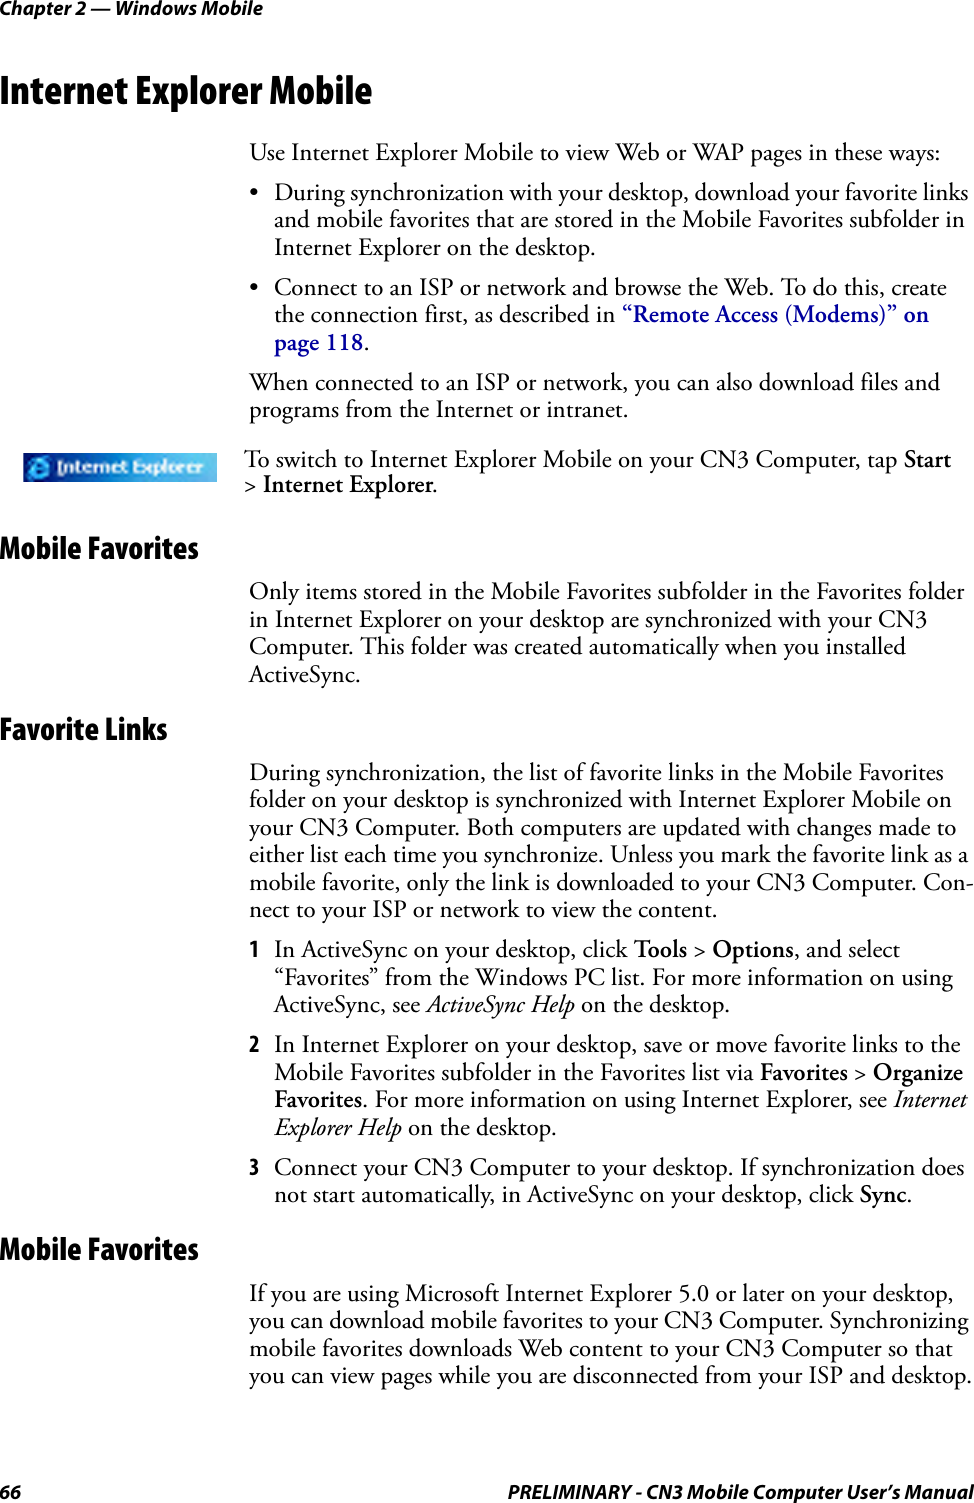 Chapter 2 — Windows Mobile66 PRELIMINARY - CN3 Mobile Computer User’s ManualInternet Explorer MobileUse Internet Explorer Mobile to view Web or WAP pages in these ways:• During synchronization with your desktop, download your favorite links and mobile favorites that are stored in the Mobile Favorites subfolder in Internet Explorer on the desktop.• Connect to an ISP or network and browse the Web. To do this, create the connection first, as described in “Remote Access (Modems)” on page 118.When connected to an ISP or network, you can also download files and programs from the Internet or intranet.Mobile FavoritesOnly items stored in the Mobile Favorites subfolder in the Favorites folder in Internet Explorer on your desktop are synchronized with your CN3 Computer. This folder was created automatically when you installed ActiveSync.Favorite LinksDuring synchronization, the list of favorite links in the Mobile Favorites folder on your desktop is synchronized with Internet Explorer Mobile on your CN3 Computer. Both computers are updated with changes made to either list each time you synchronize. Unless you mark the favorite link as a mobile favorite, only the link is downloaded to your CN3 Computer. Con-nect to your ISP or network to view the content.1In ActiveSync on your desktop, click To o l s  &gt; Options, and select “Favorites” from the Windows PC list. For more information on using ActiveSync, see ActiveSync Help on the desktop.2In Internet Explorer on your desktop, save or move favorite links to the Mobile Favorites subfolder in the Favorites list via Favorites &gt; Organize Favorites. For more information on using Internet Explorer, see Internet Explorer Help on the desktop.3Connect your CN3 Computer to your desktop. If synchronization does not start automatically, in ActiveSync on your desktop, click Sync.Mobile FavoritesIf you are using Microsoft Internet Explorer 5.0 or later on your desktop, you can download mobile favorites to your CN3 Computer. Synchronizing mobile favorites downloads Web content to your CN3 Computer so that you can view pages while you are disconnected from your ISP and desktop.To switch to Internet Explorer Mobile on your CN3 Computer, tap Start &gt; Internet Explorer. 